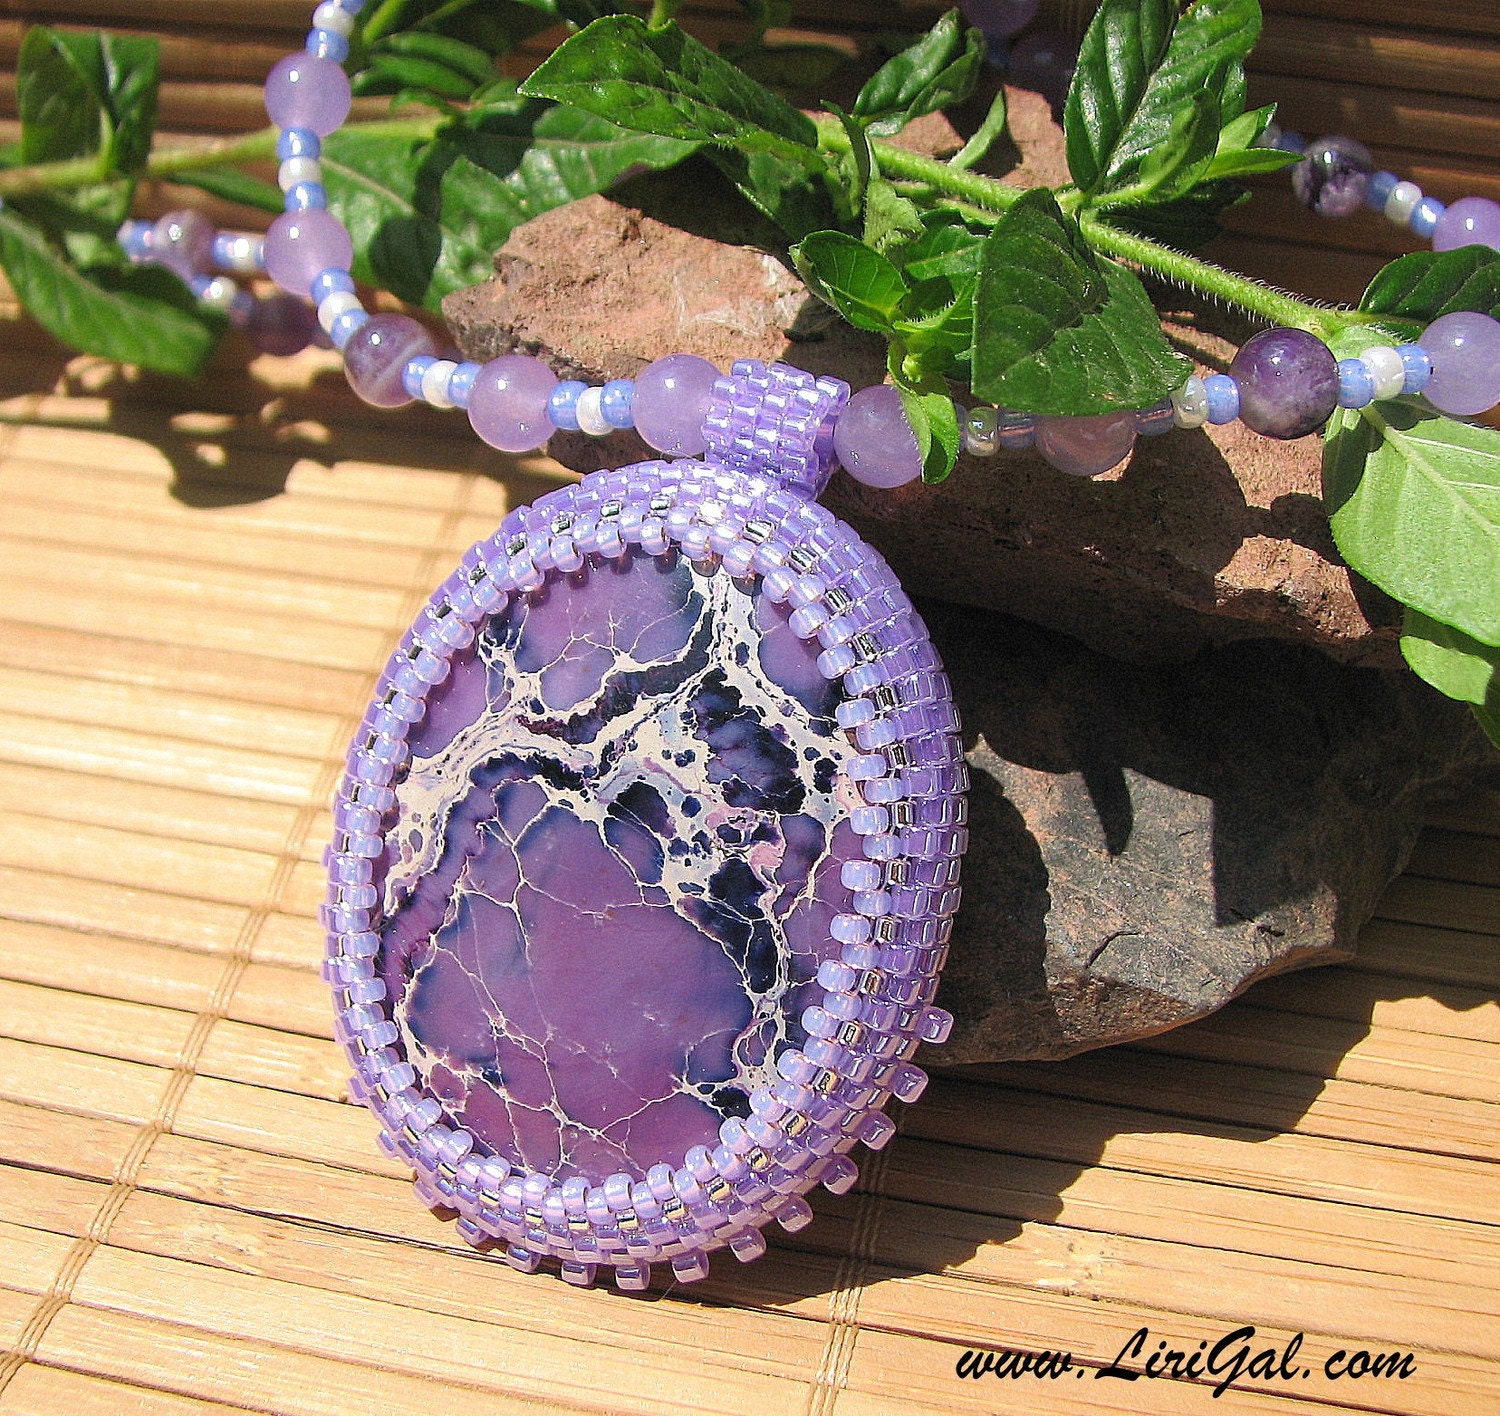 Purple African Turquoise  Beaded Cabochon Pendant